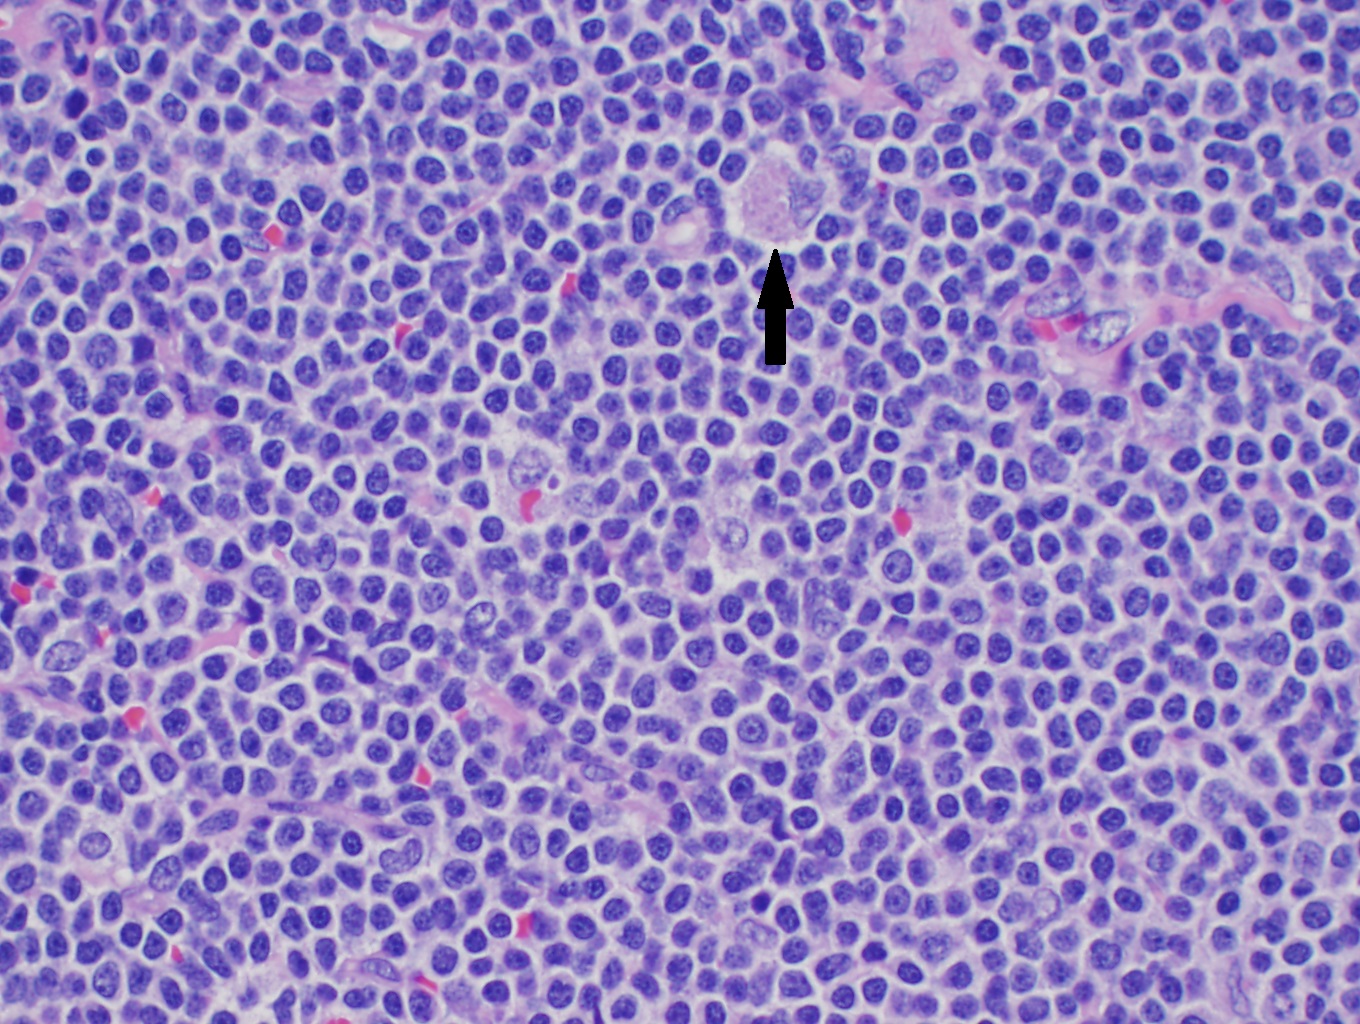 High power H&amp;E of mantle cell lymphoma showing monotonous mature lymphocytes with mildly irregular nuclei